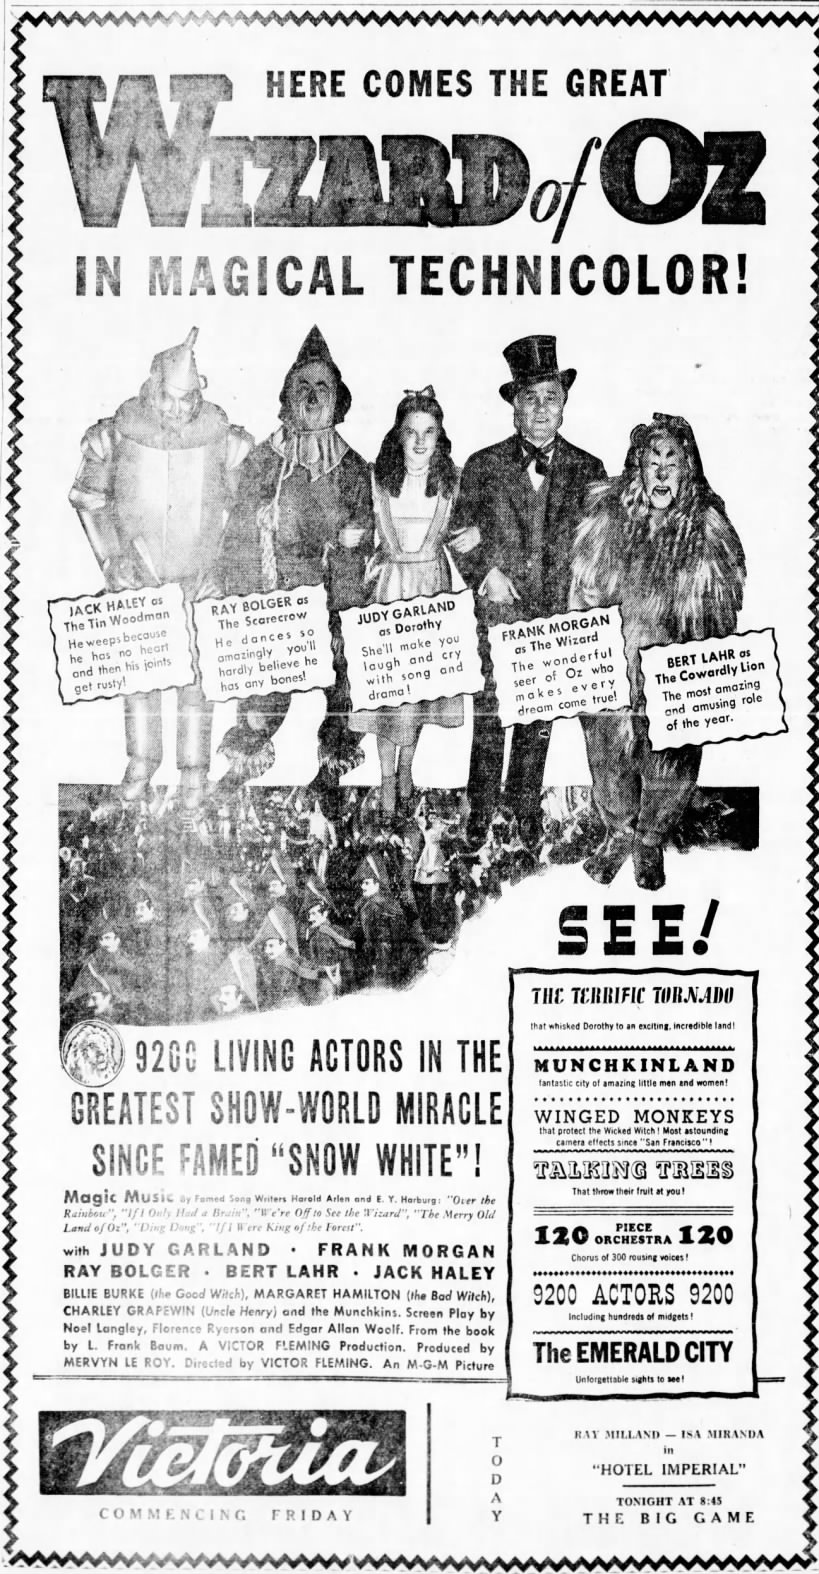 "Wizard of Oz" theater ad